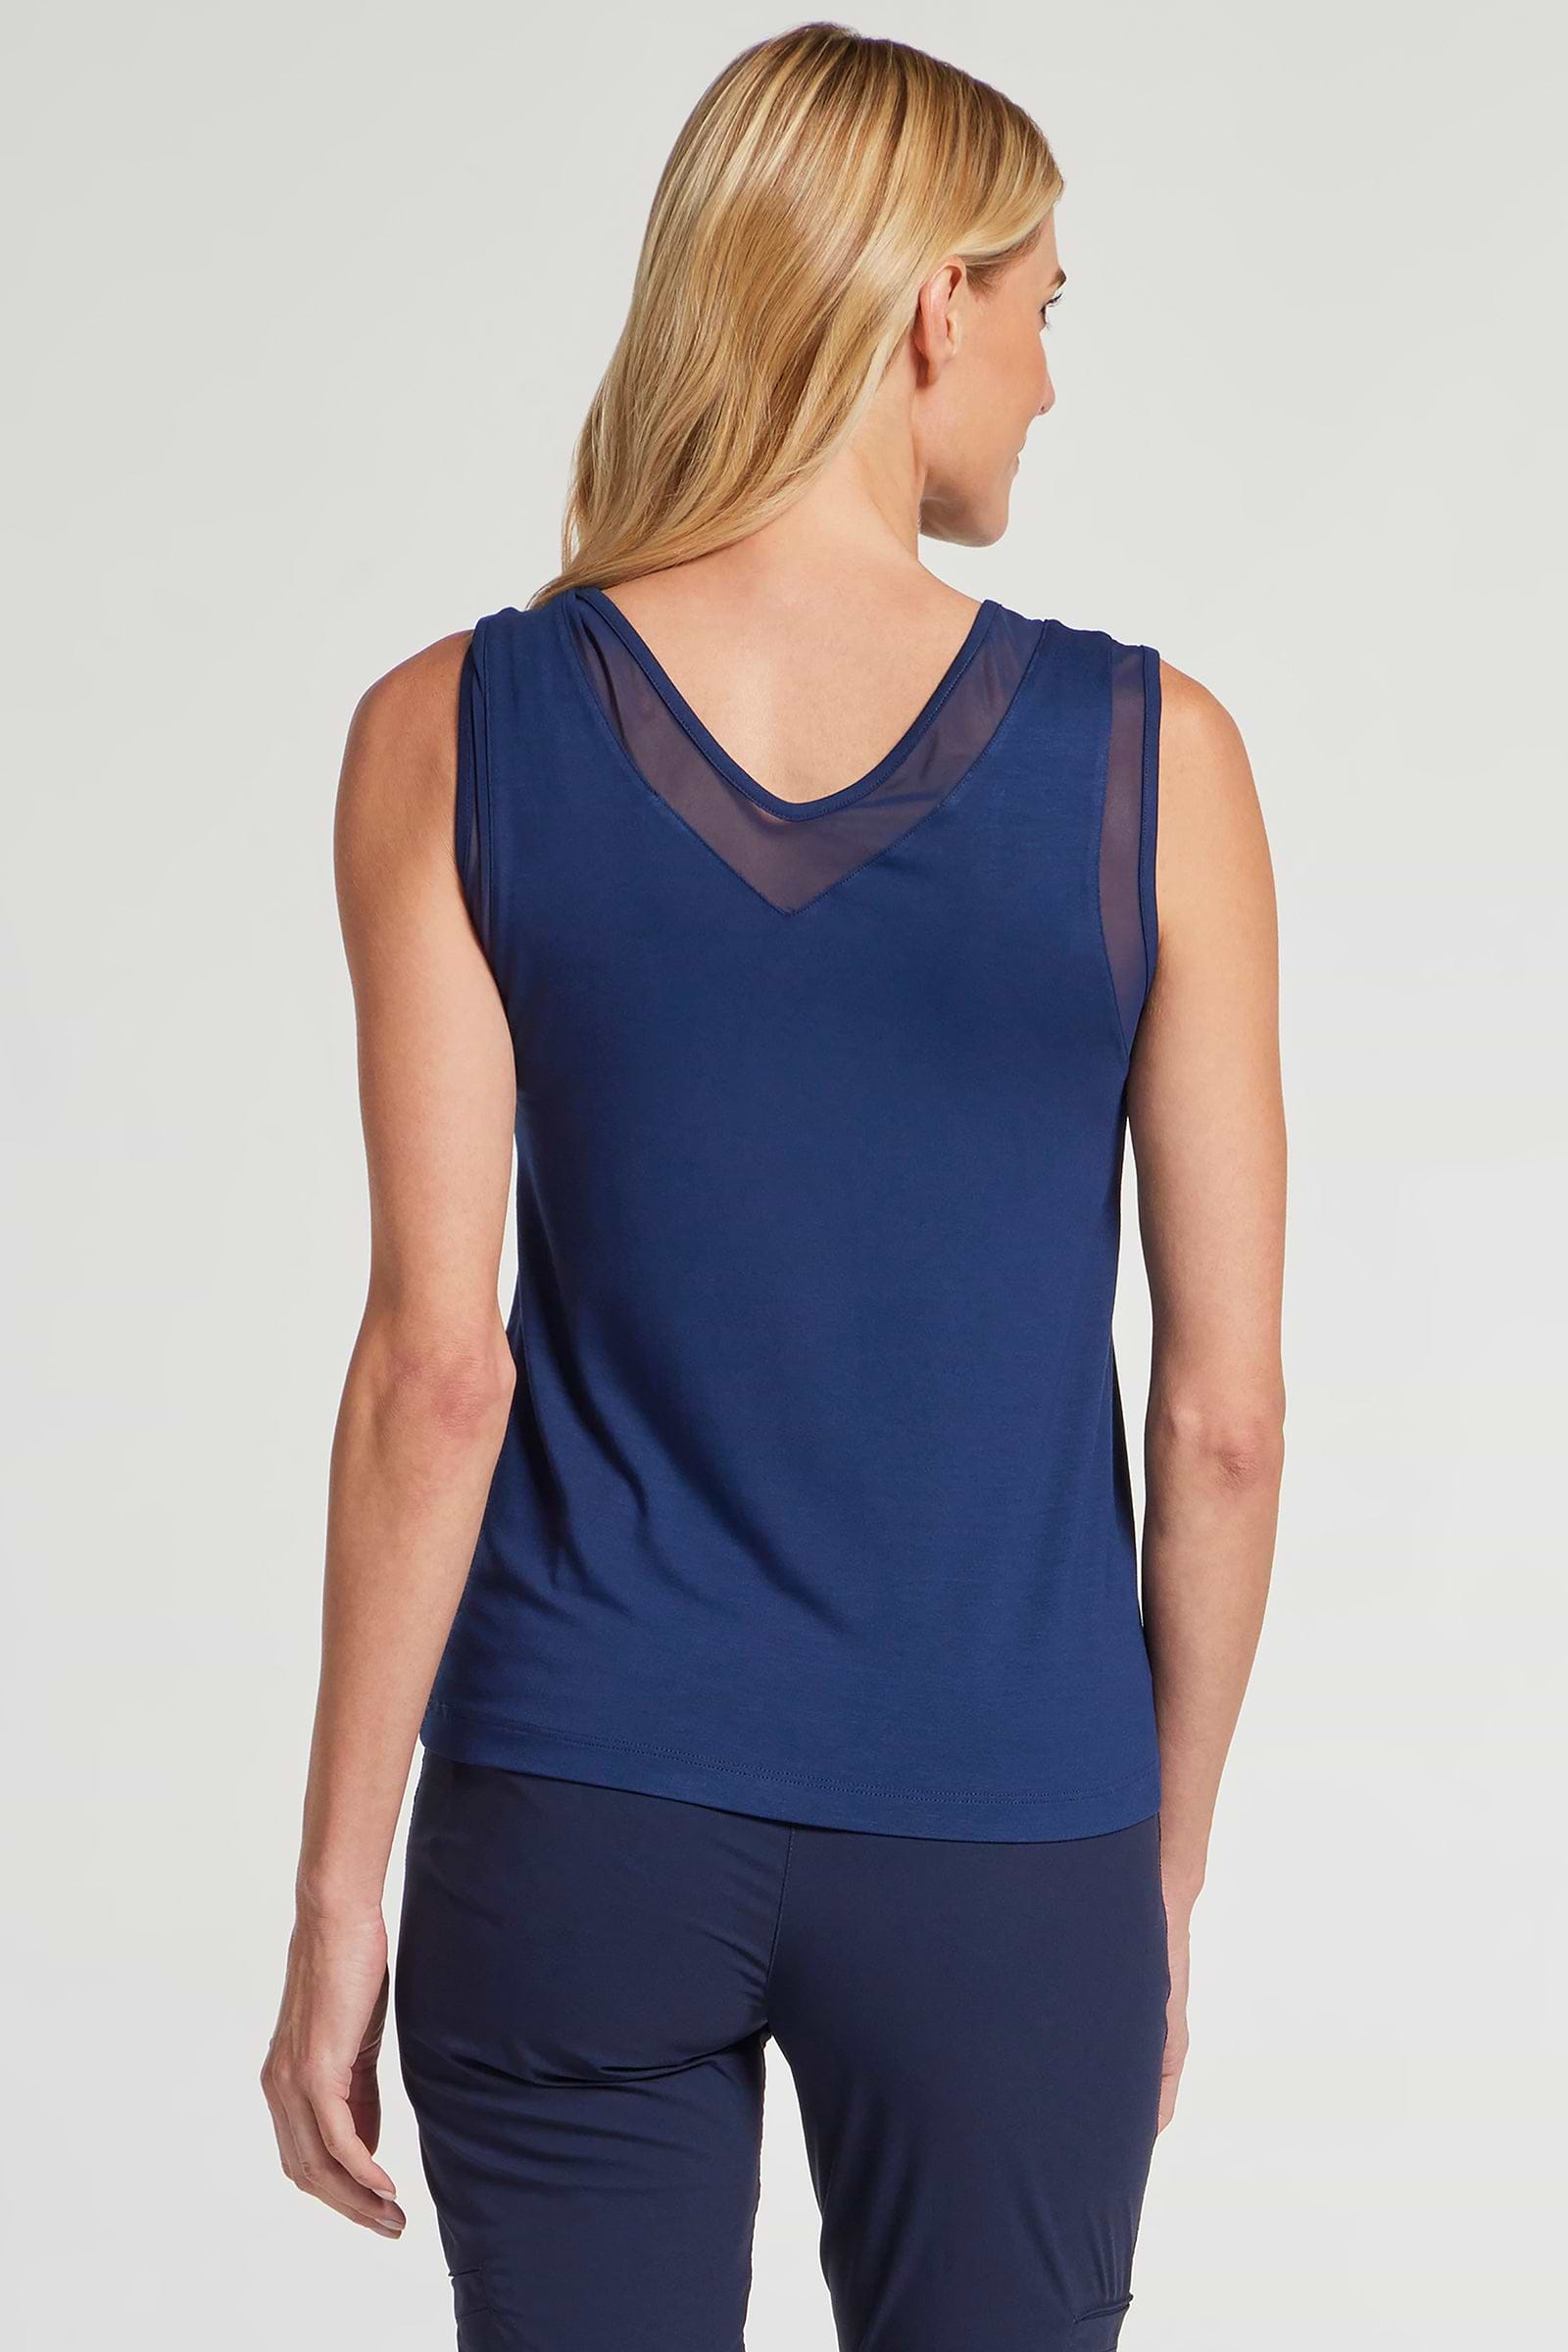 The Best Travel Tank Top. Woman Showing the Back Profile of a Jackson Pima Tank in Navy.